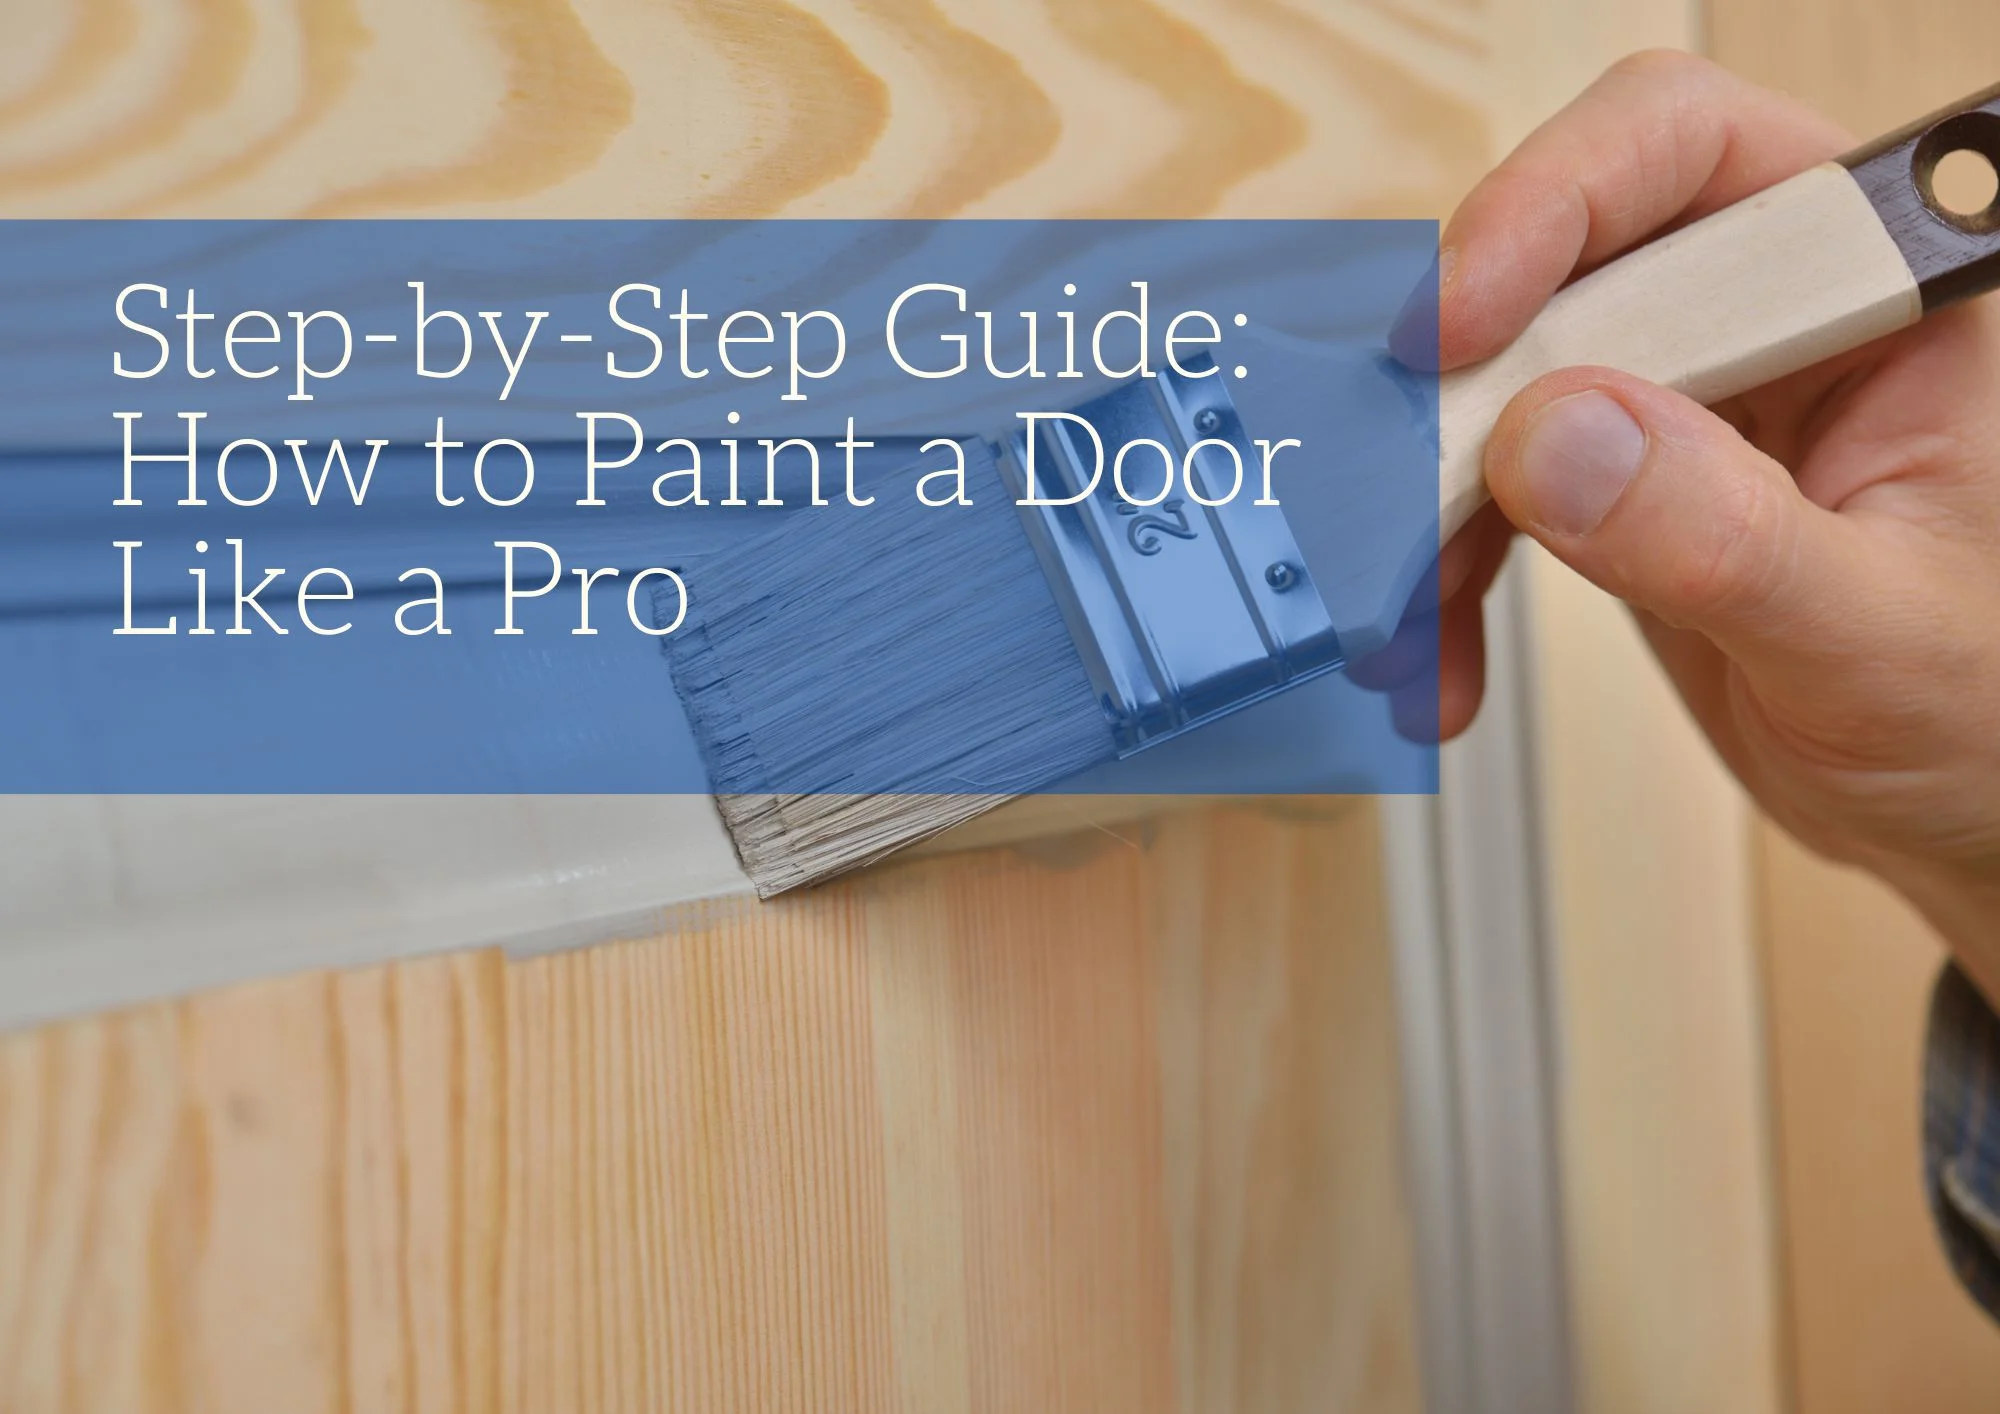 Step-by-Step Guide How to Paint a Door Like a Pro